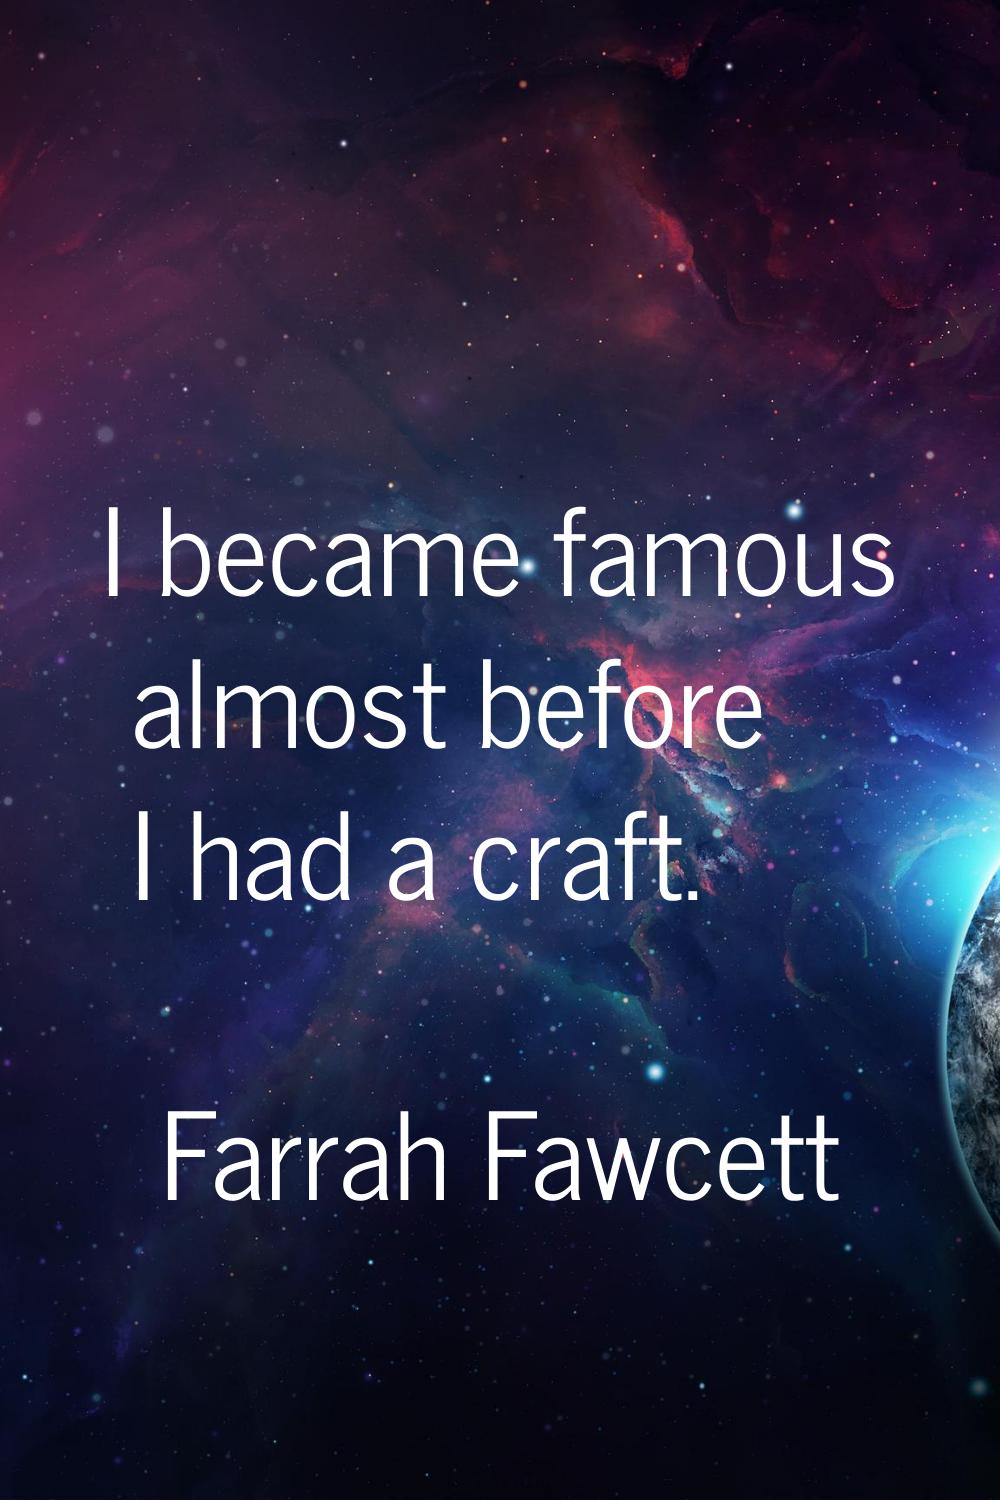 I became famous almost before I had a craft.